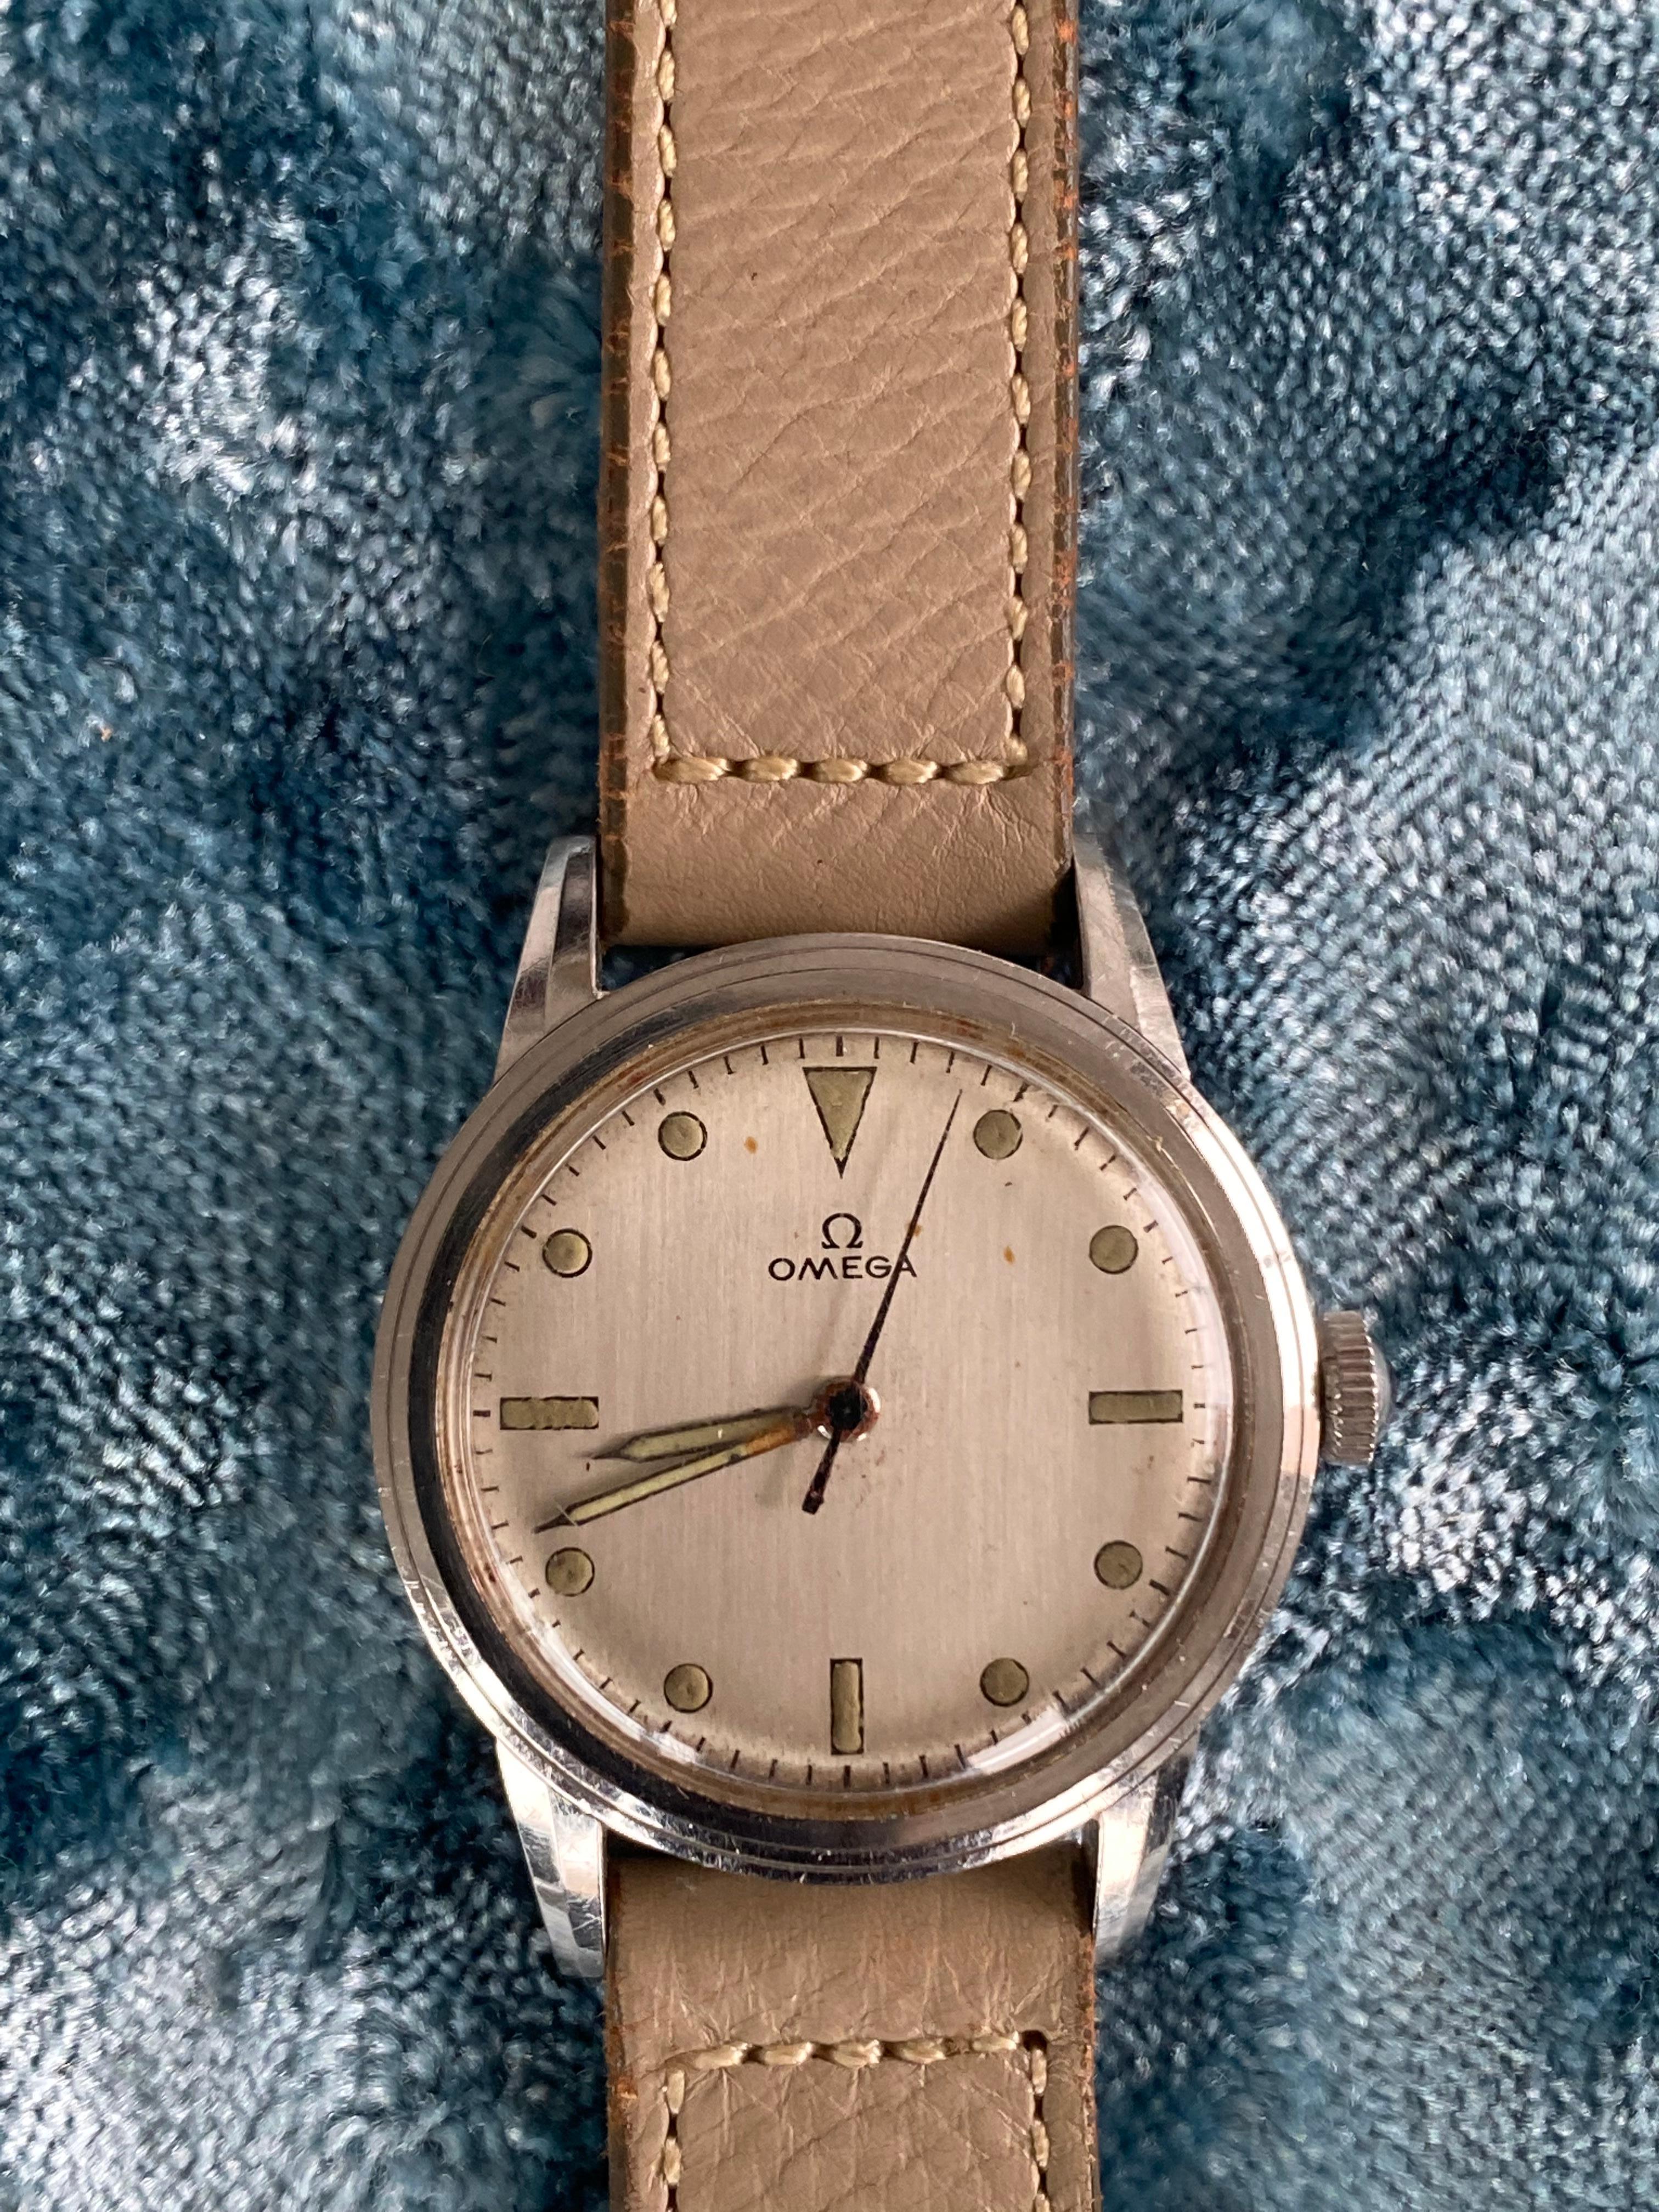 OMEGA self-winding watch.
Medium face. 
Circa 1960
There are small marks on the back cover, but overall it is in excellent condition.
The belt is an external product. Off white lather.
Operating without any problems.
The caliber is 501.
The size is